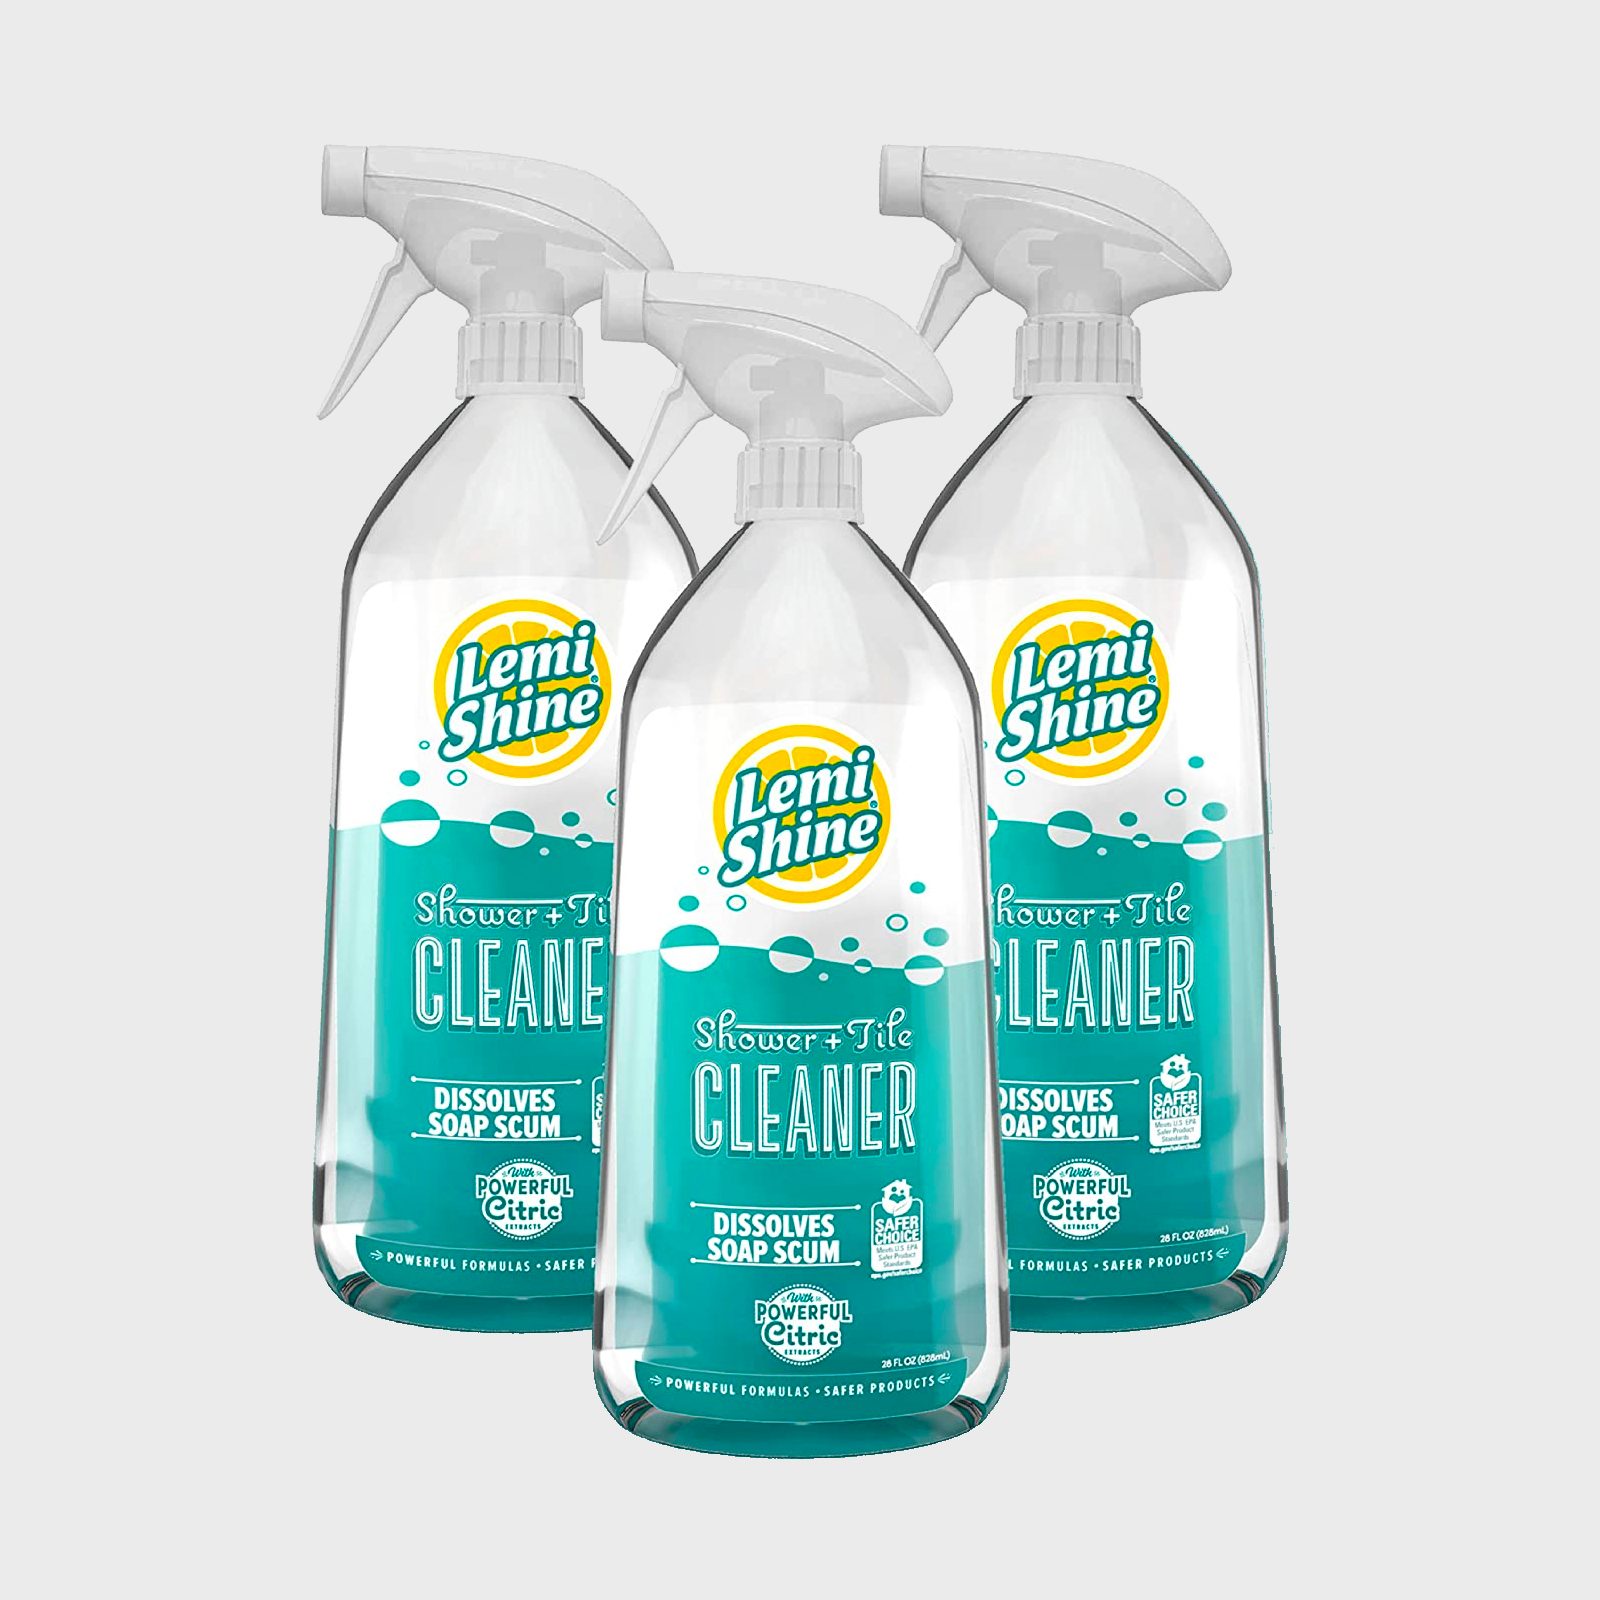 Go Green(er): 11 Eco-Friendly Cleaning Products to Try in 2019